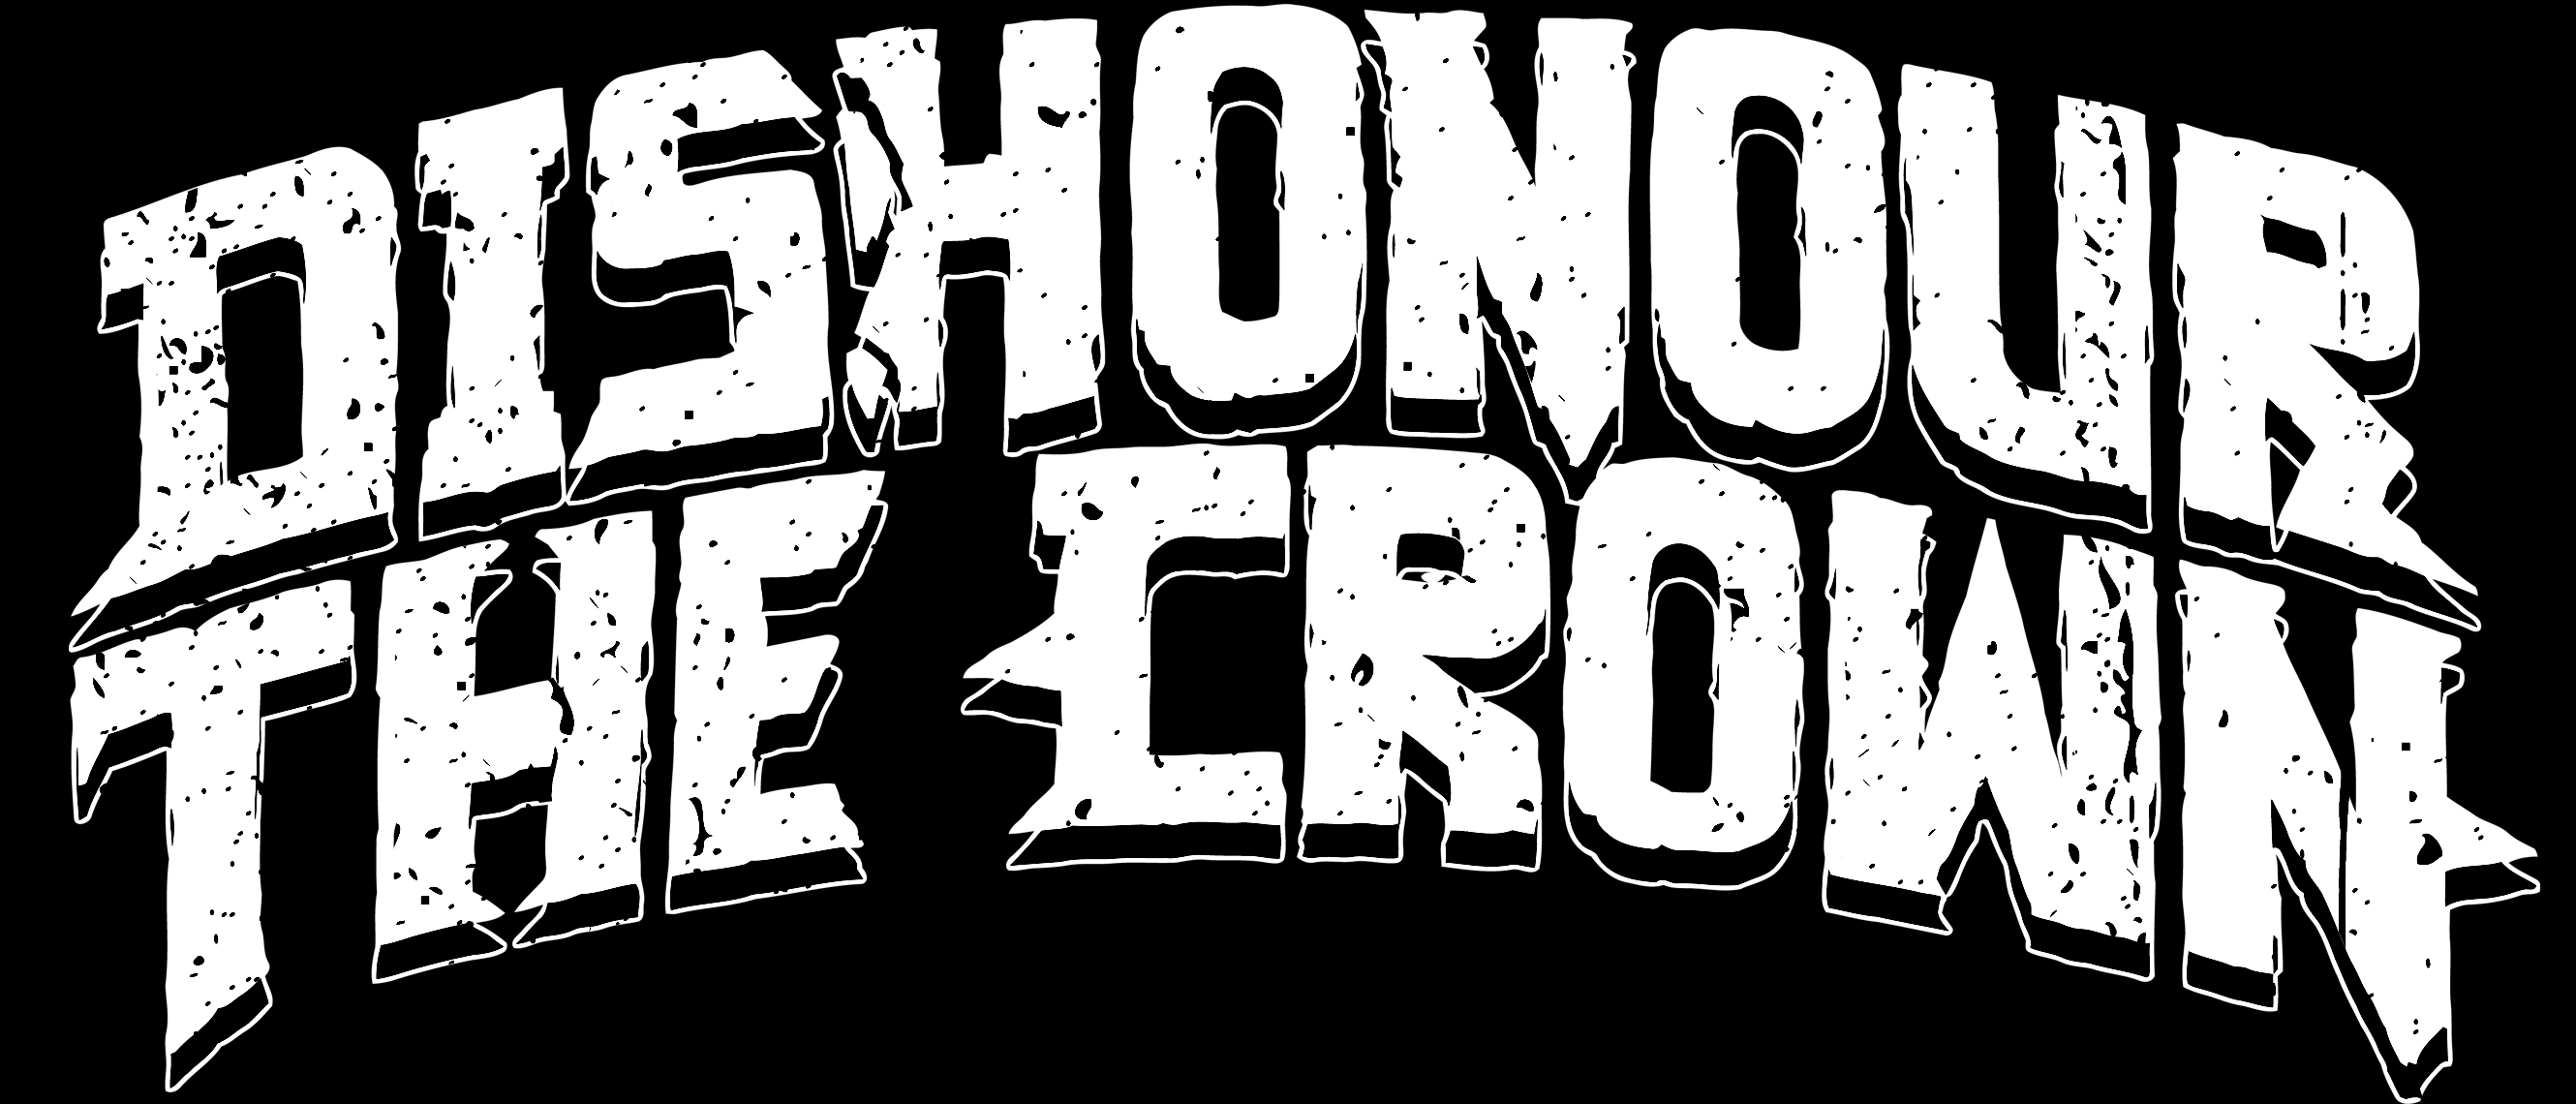 Dishonour the Crown